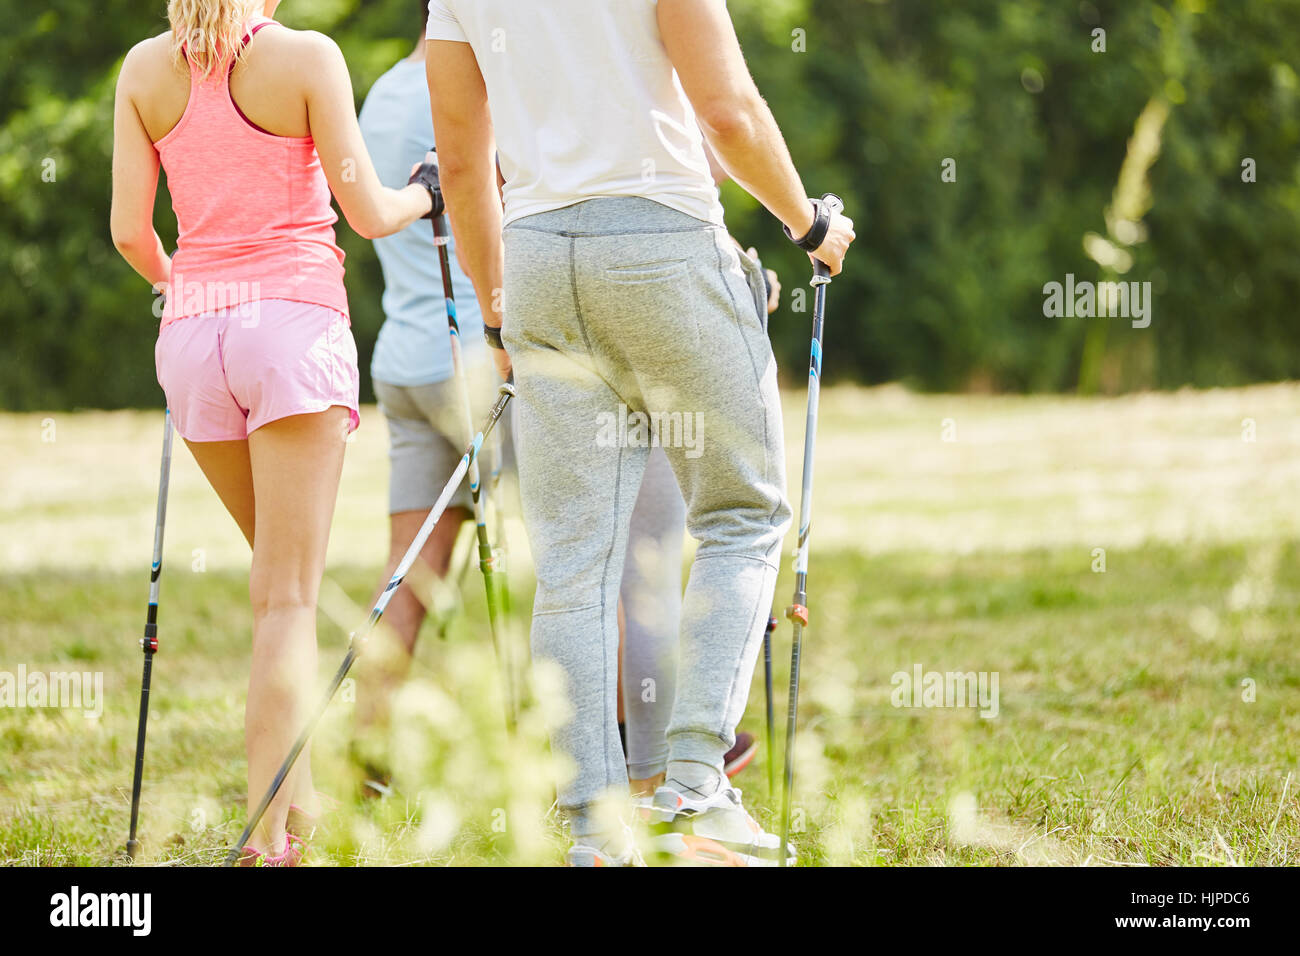 Hiking trip with hiking sticks their summer holiday vacation time Stock Photo